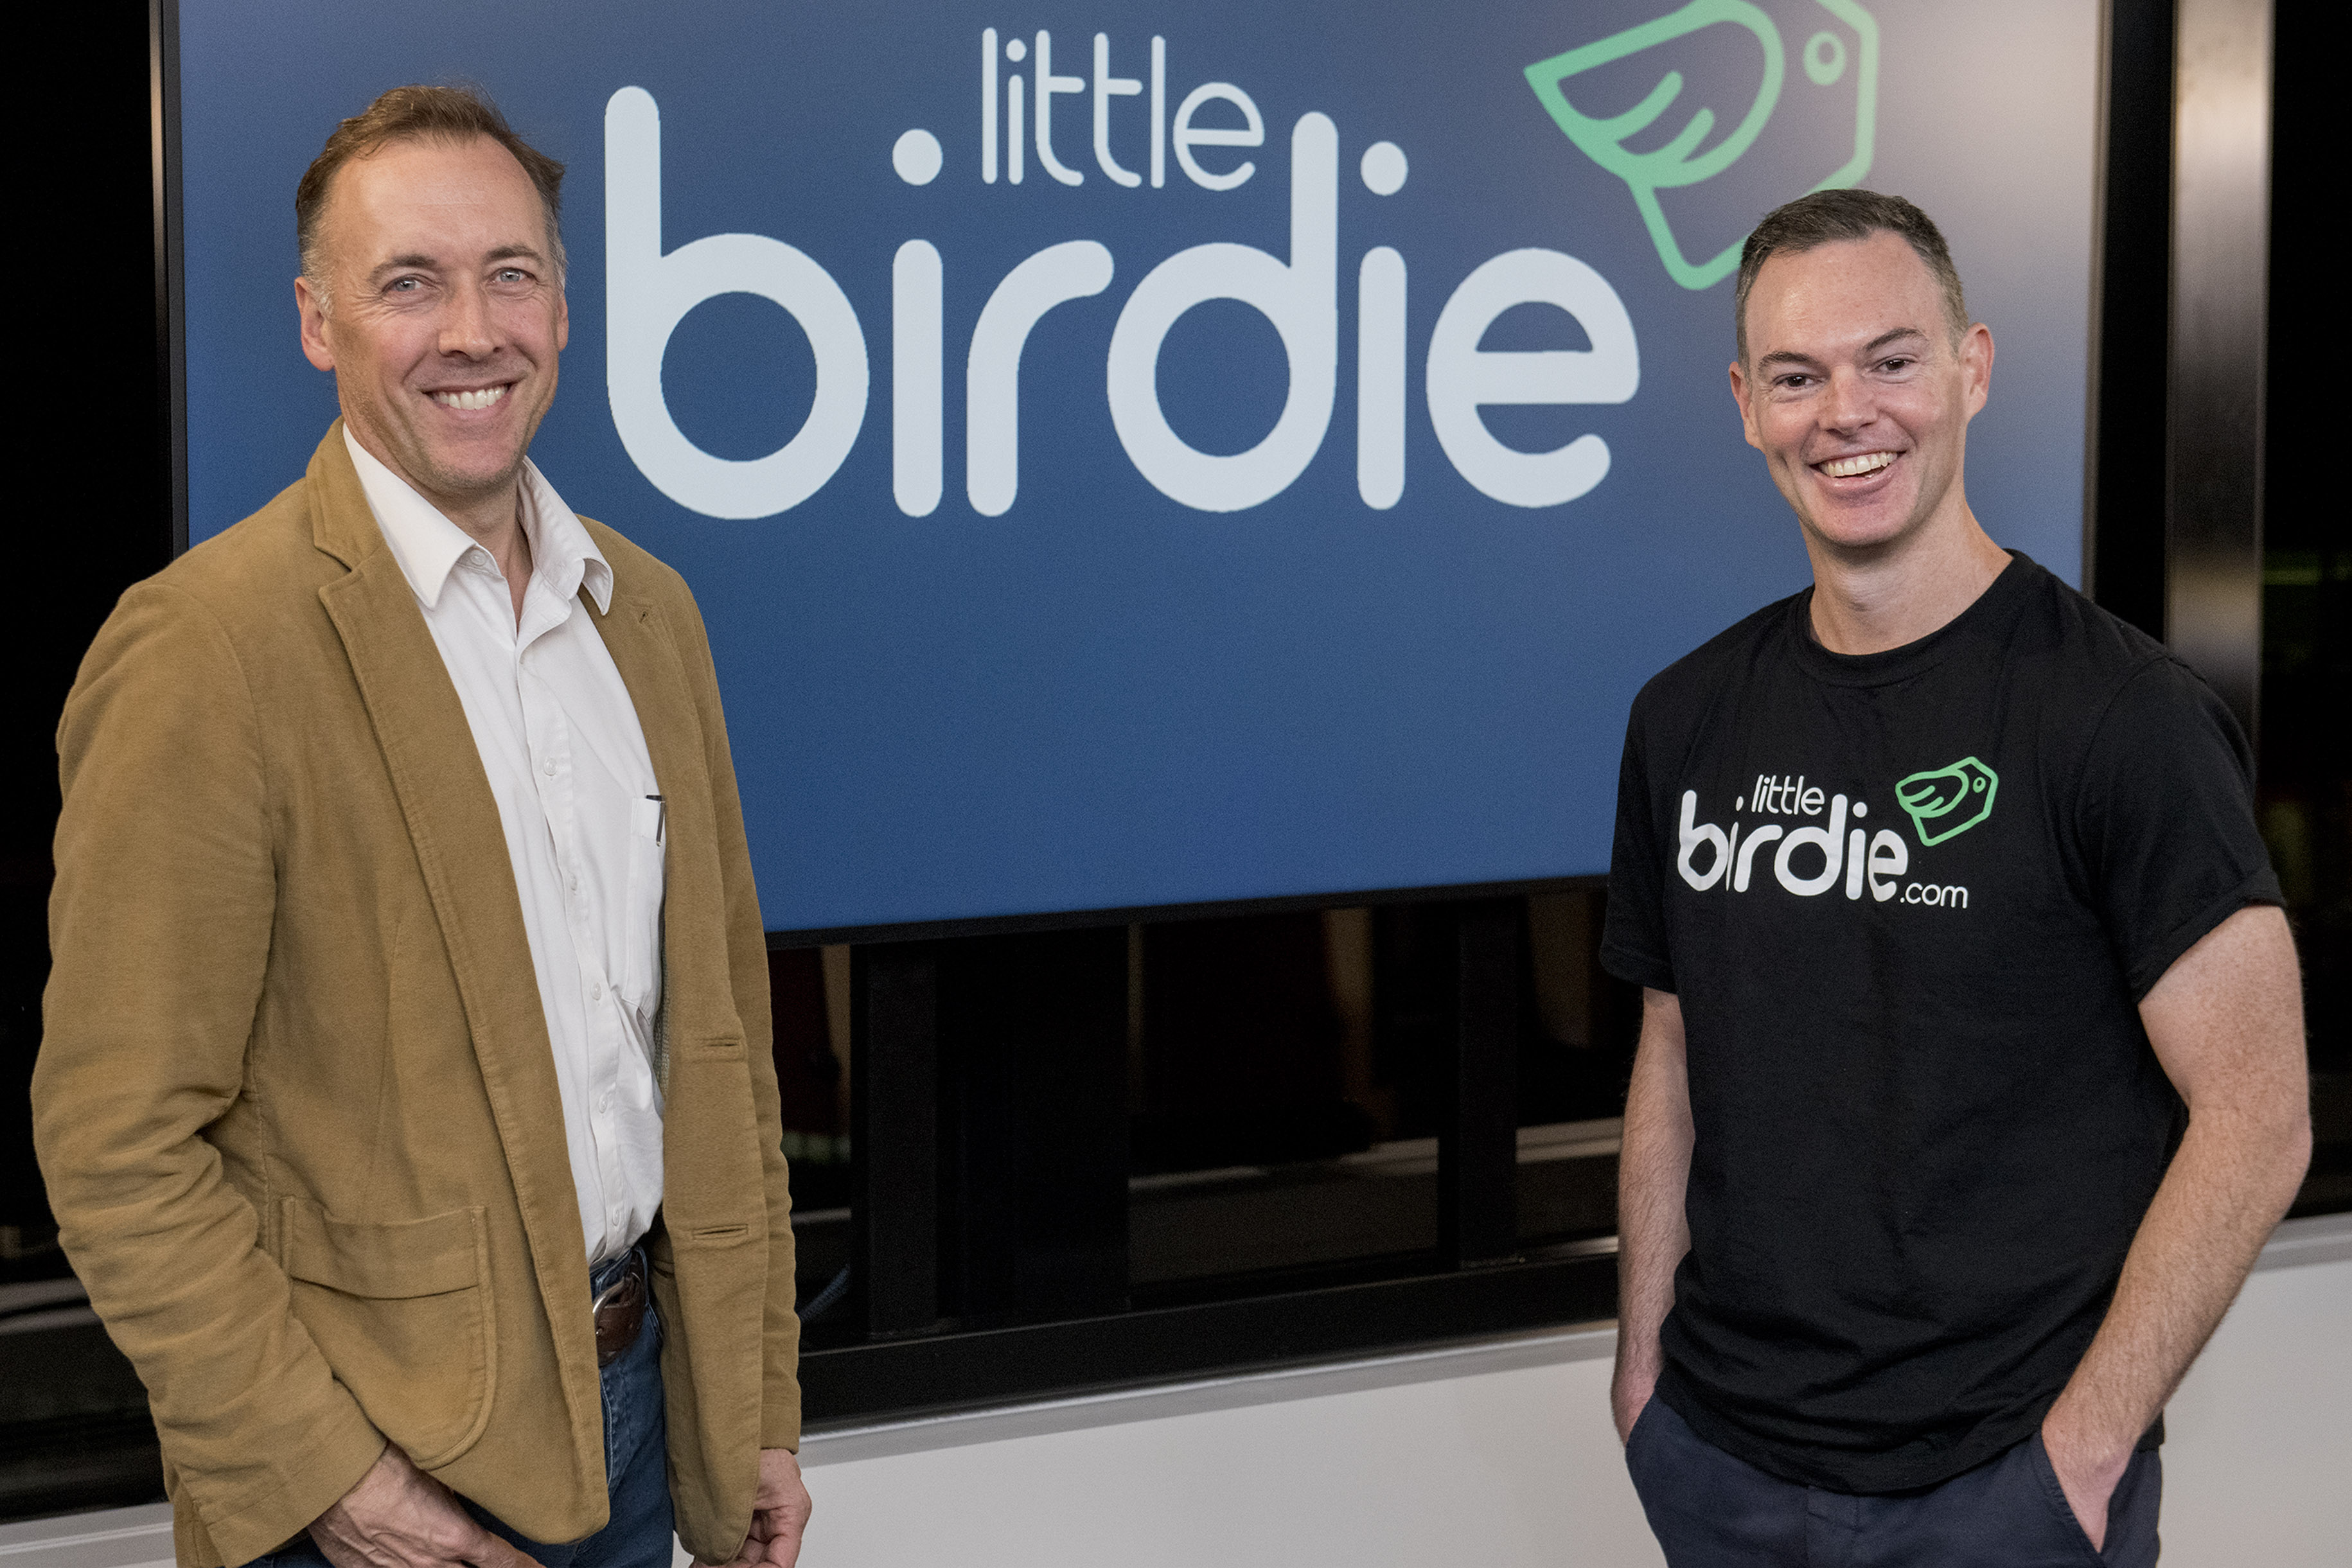 A photo of (left) Commonwealth Bank group executive Angus Sullivan and (right) Jon Beros, co-founder and CEO of Little Birdie, standing in front of Little Birdie’s logo